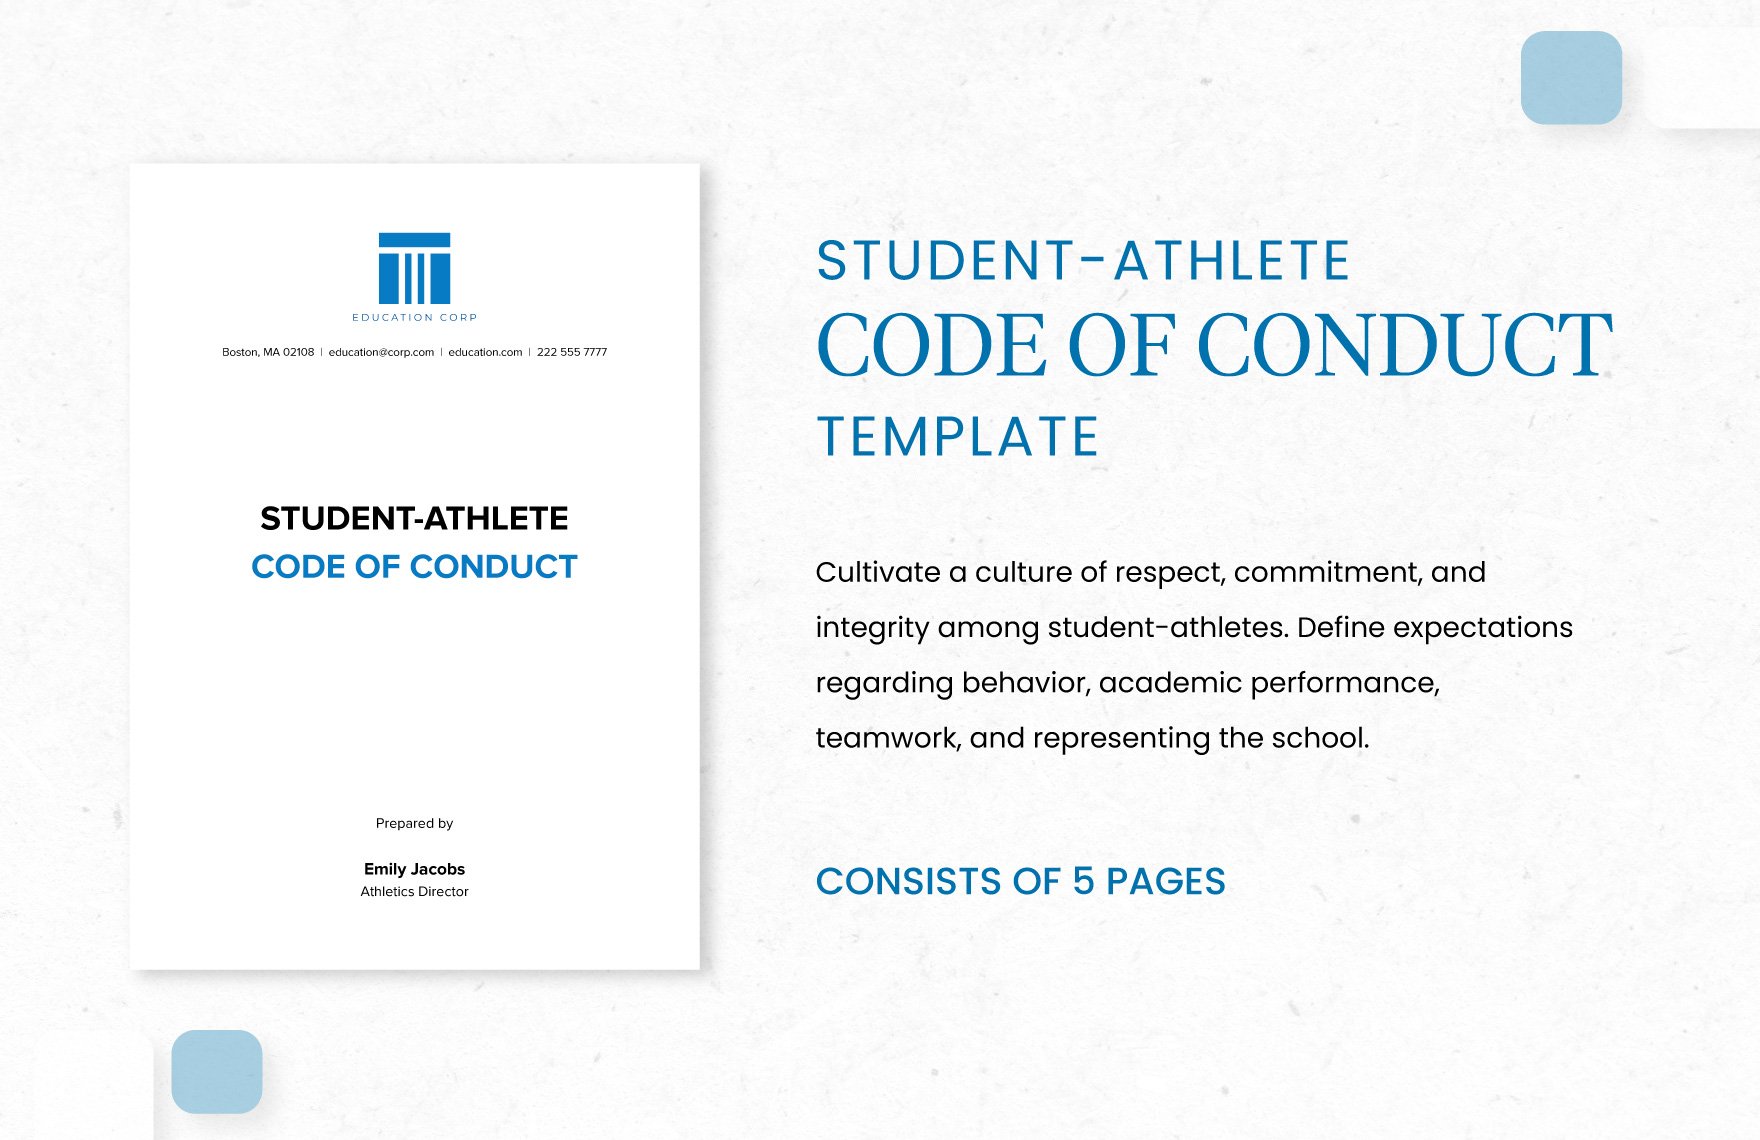 Student-Athlete Code of Conduct Template